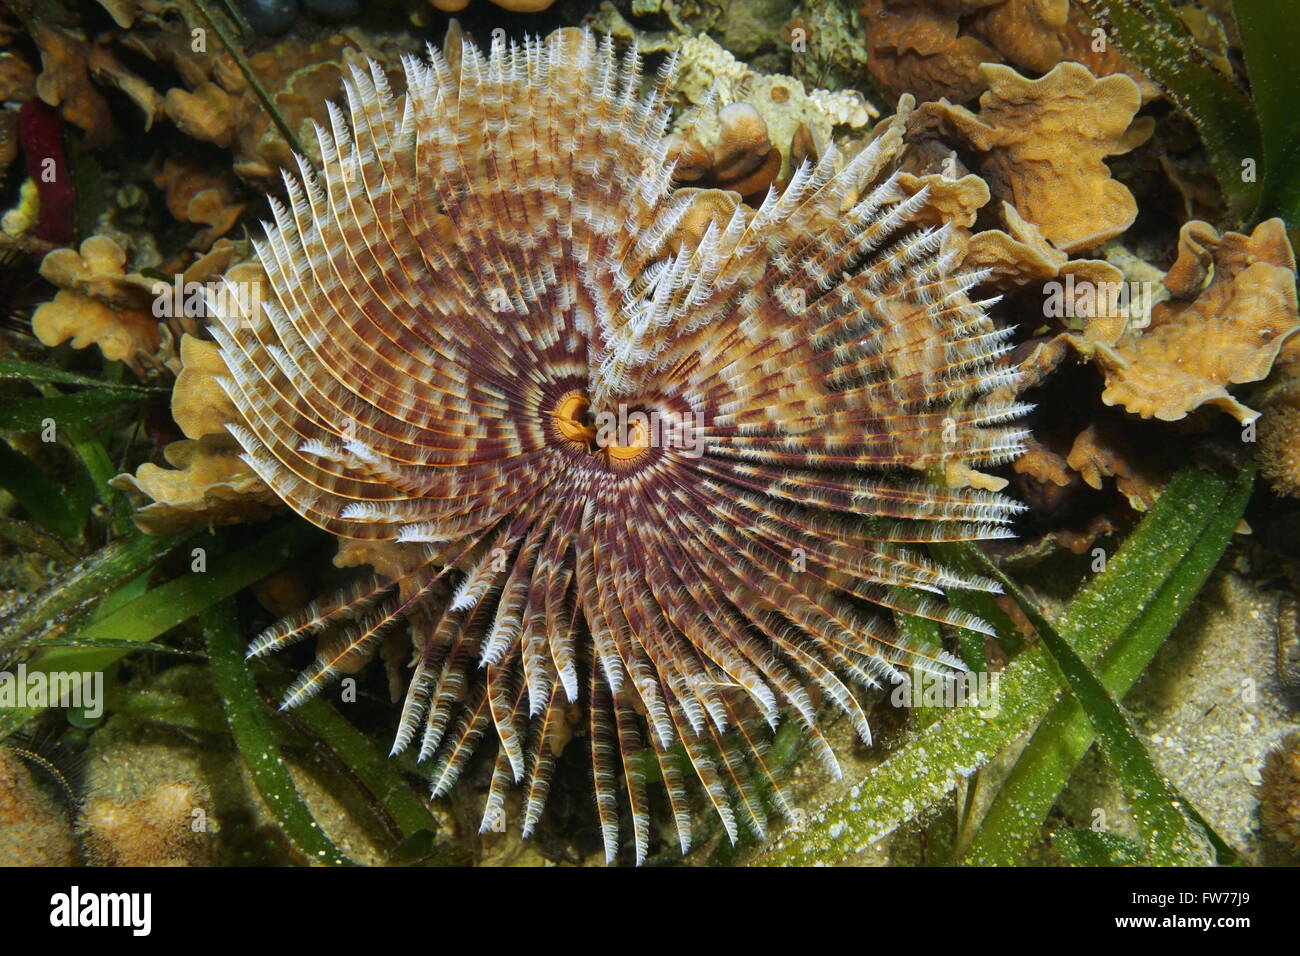 Underwater marine worm, a Magnificent feather duster worm, Sabellastarte magnifica, Caribbean sea Stock Photo